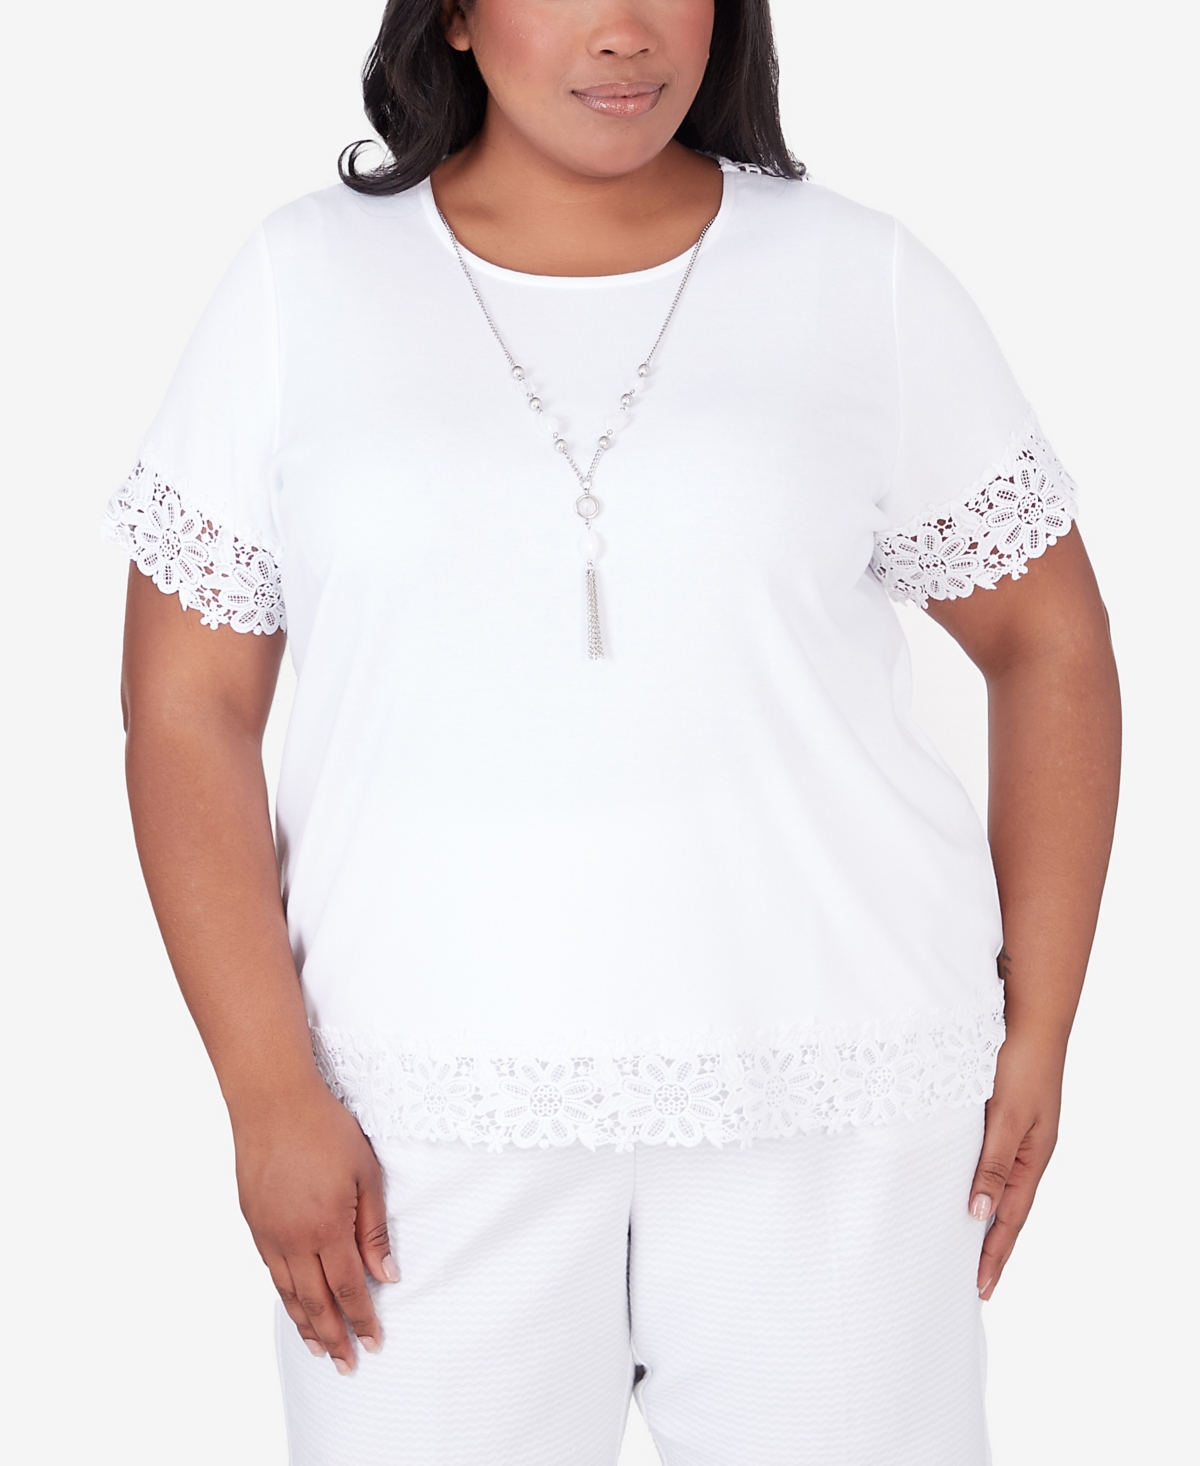 Plus Size Charleston T-shirt with Lace Border Details and Detachable Necklace - White